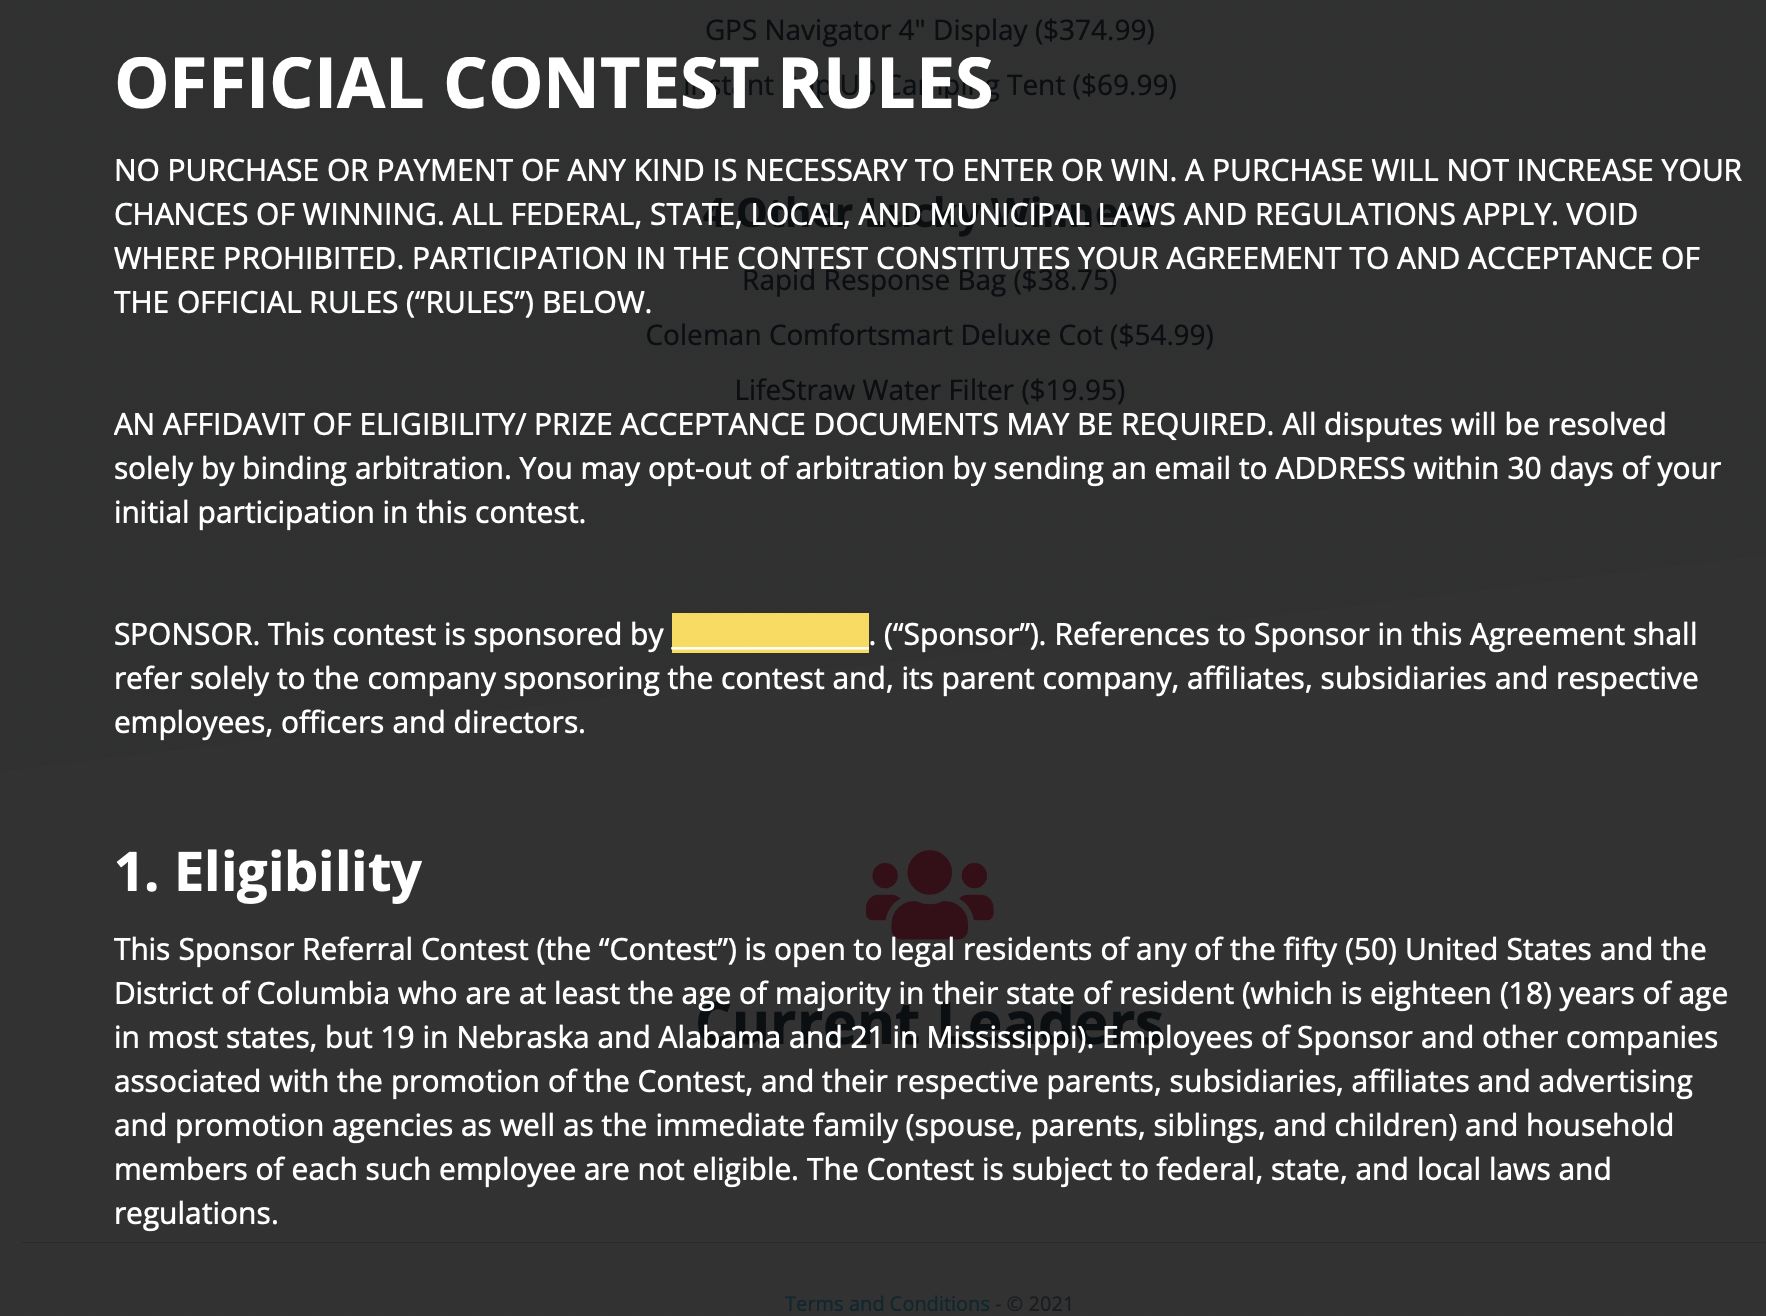 contest rules